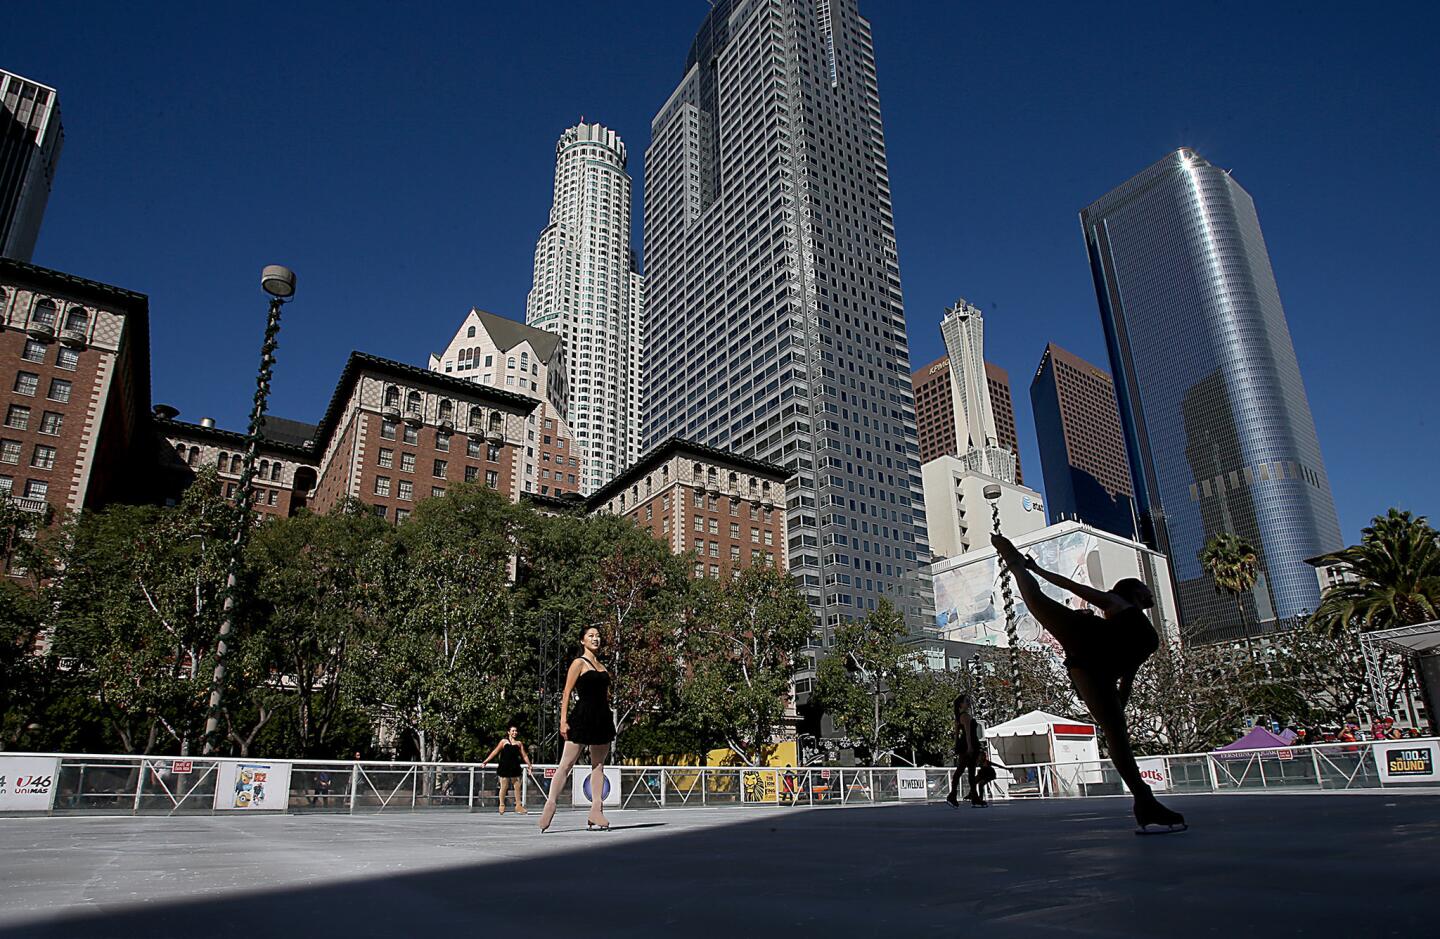 Figure skaters perform during the opening of the 16th Annual Downtown On Ice outdoor skating rink at Pershing Square.